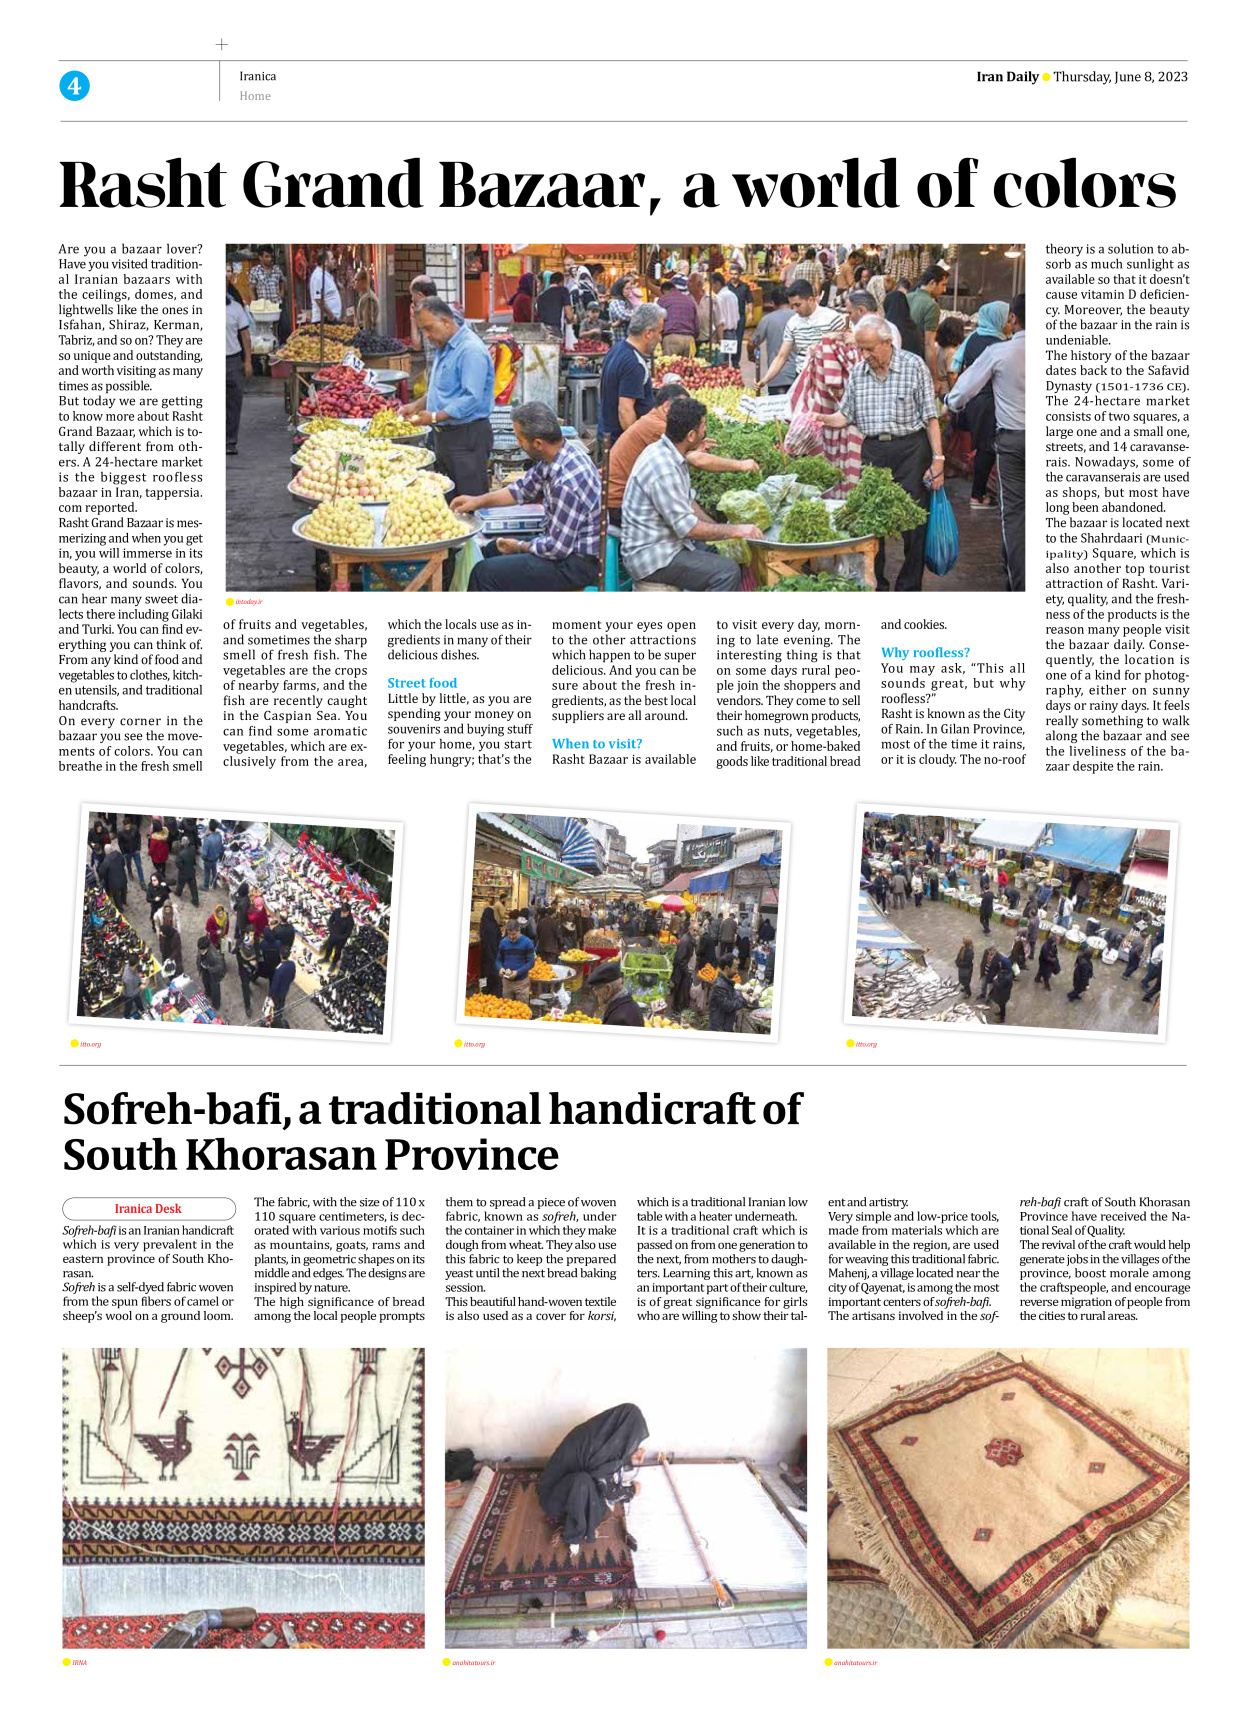 Iran Daily - Number Seven Thousand Three Hundred and Nine - 08 June 2023 - Page 4